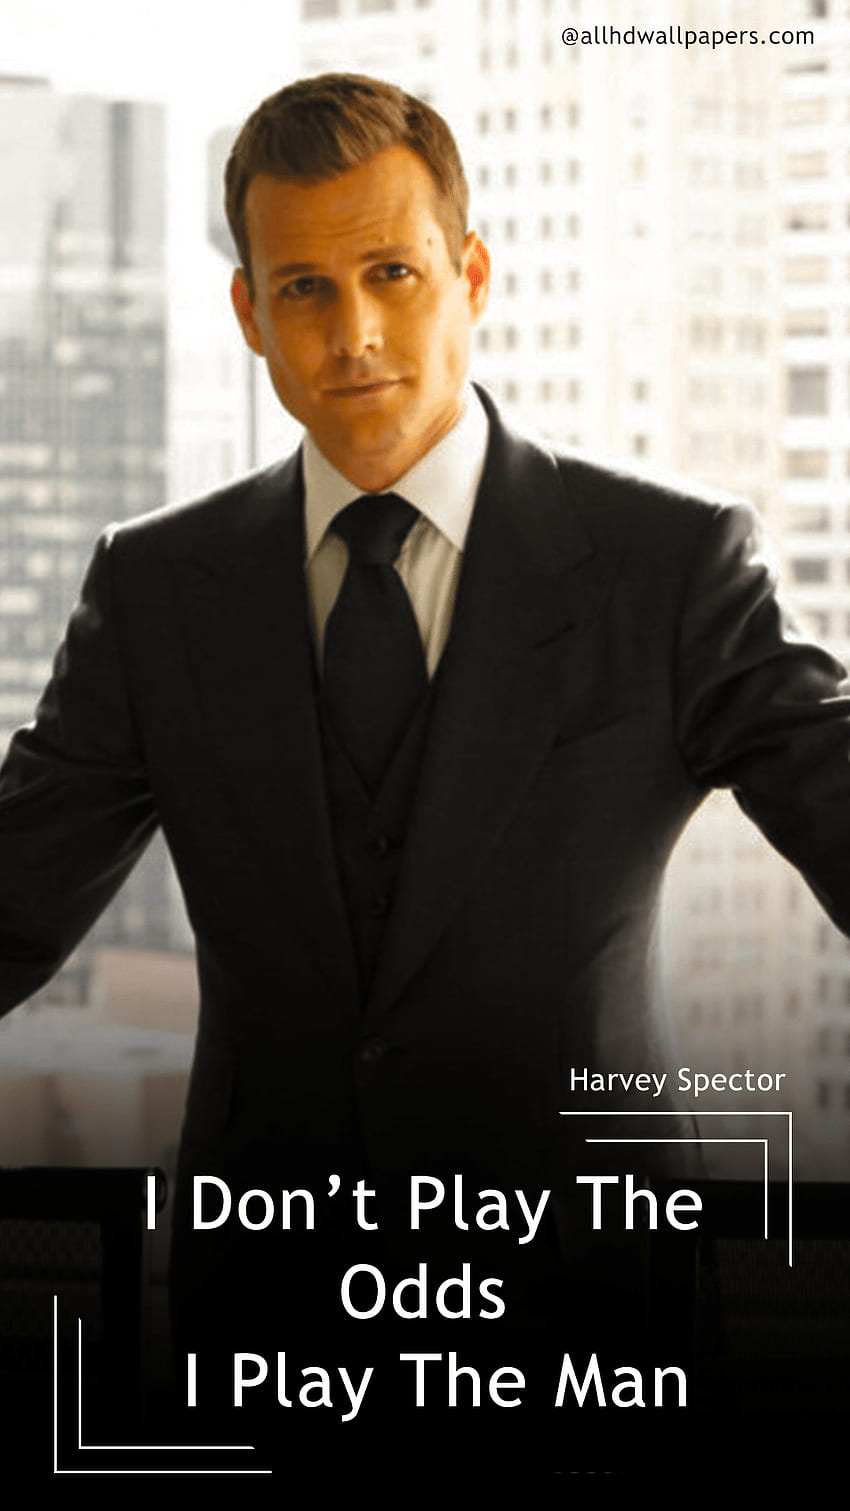 Desktop   Harvey Specter Quotes Will Inspire You To Work Hard Harvey Specter Season 4 Background Suits Quotes 